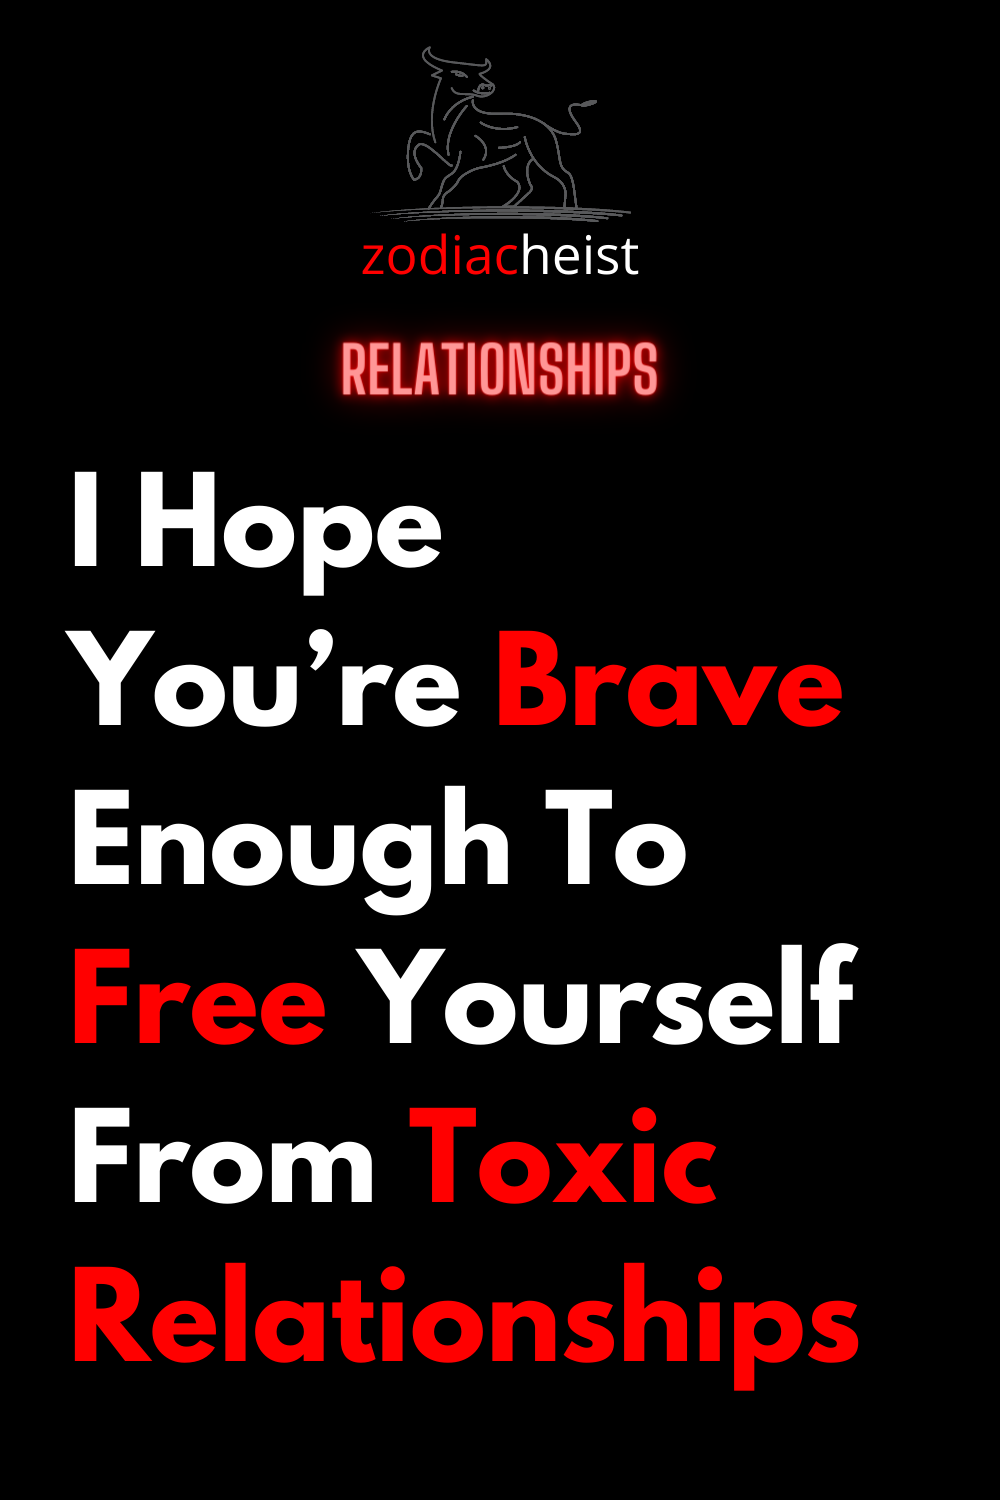 I Hope You’re Brave Enough To Free Yourself From Toxic Relationships